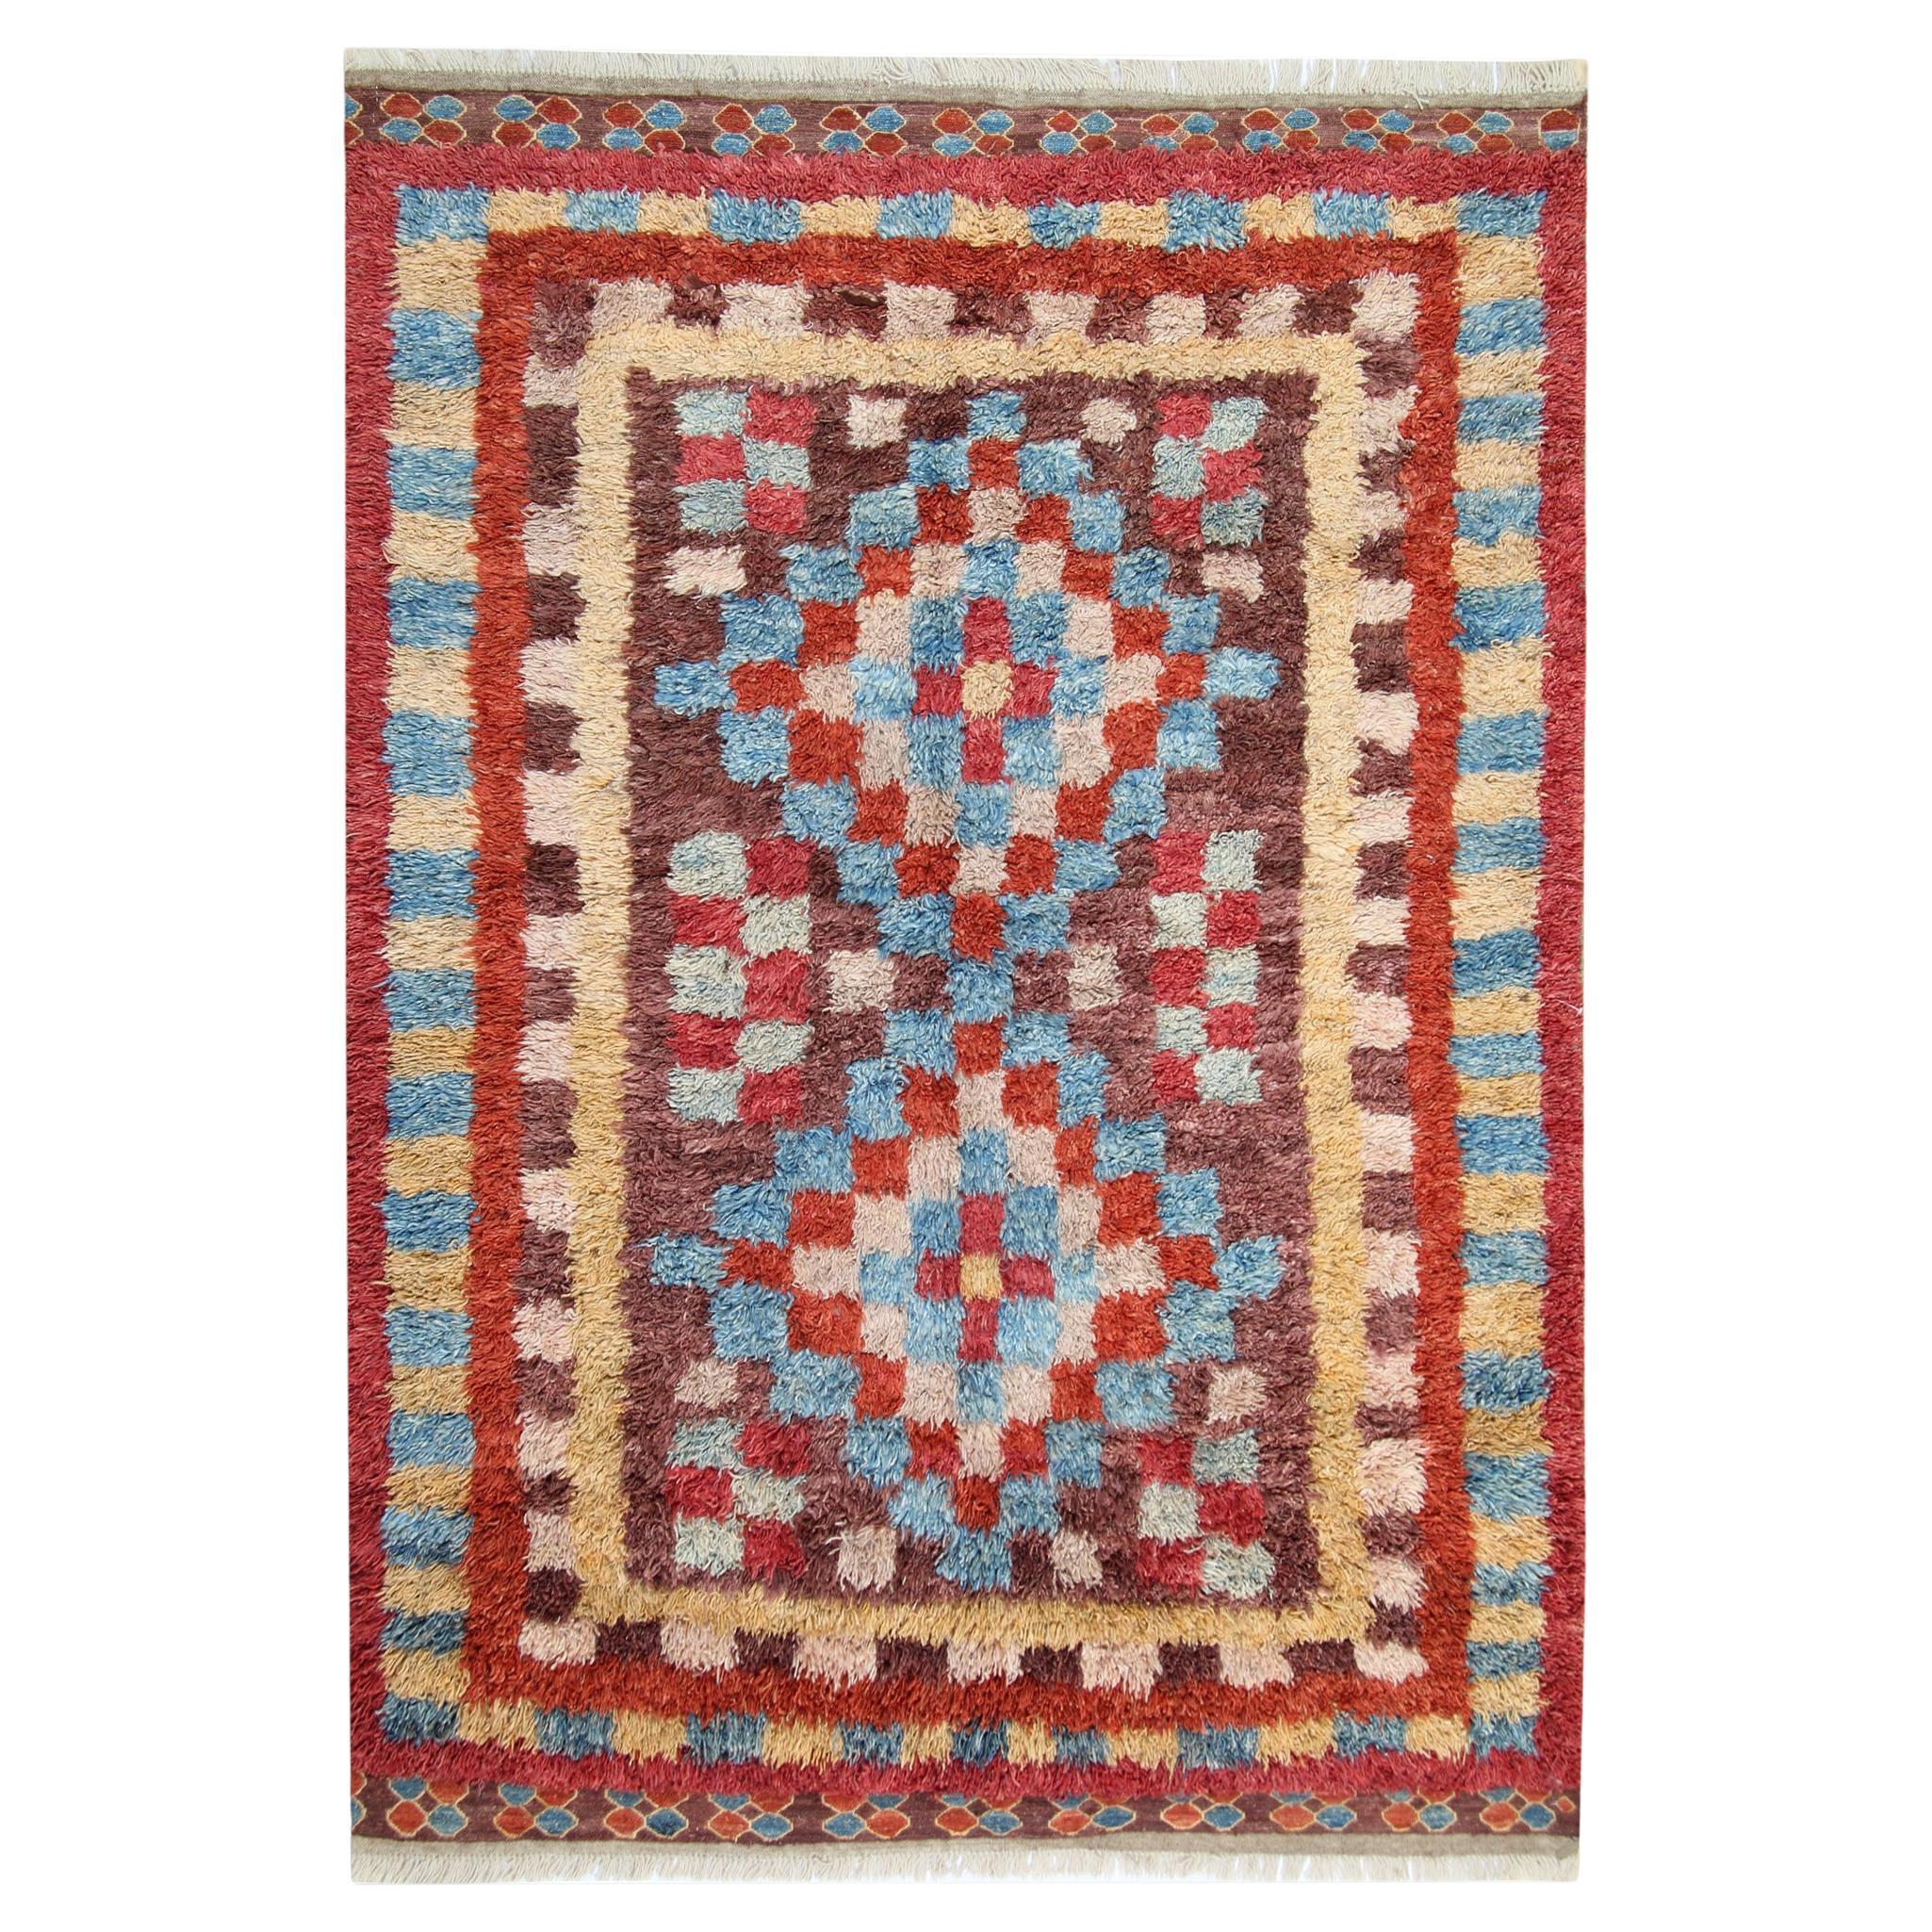 Handmade Carpet Moroccan Rugs, Shag Rugs, Pink and Red Primitive Carpet for Sale